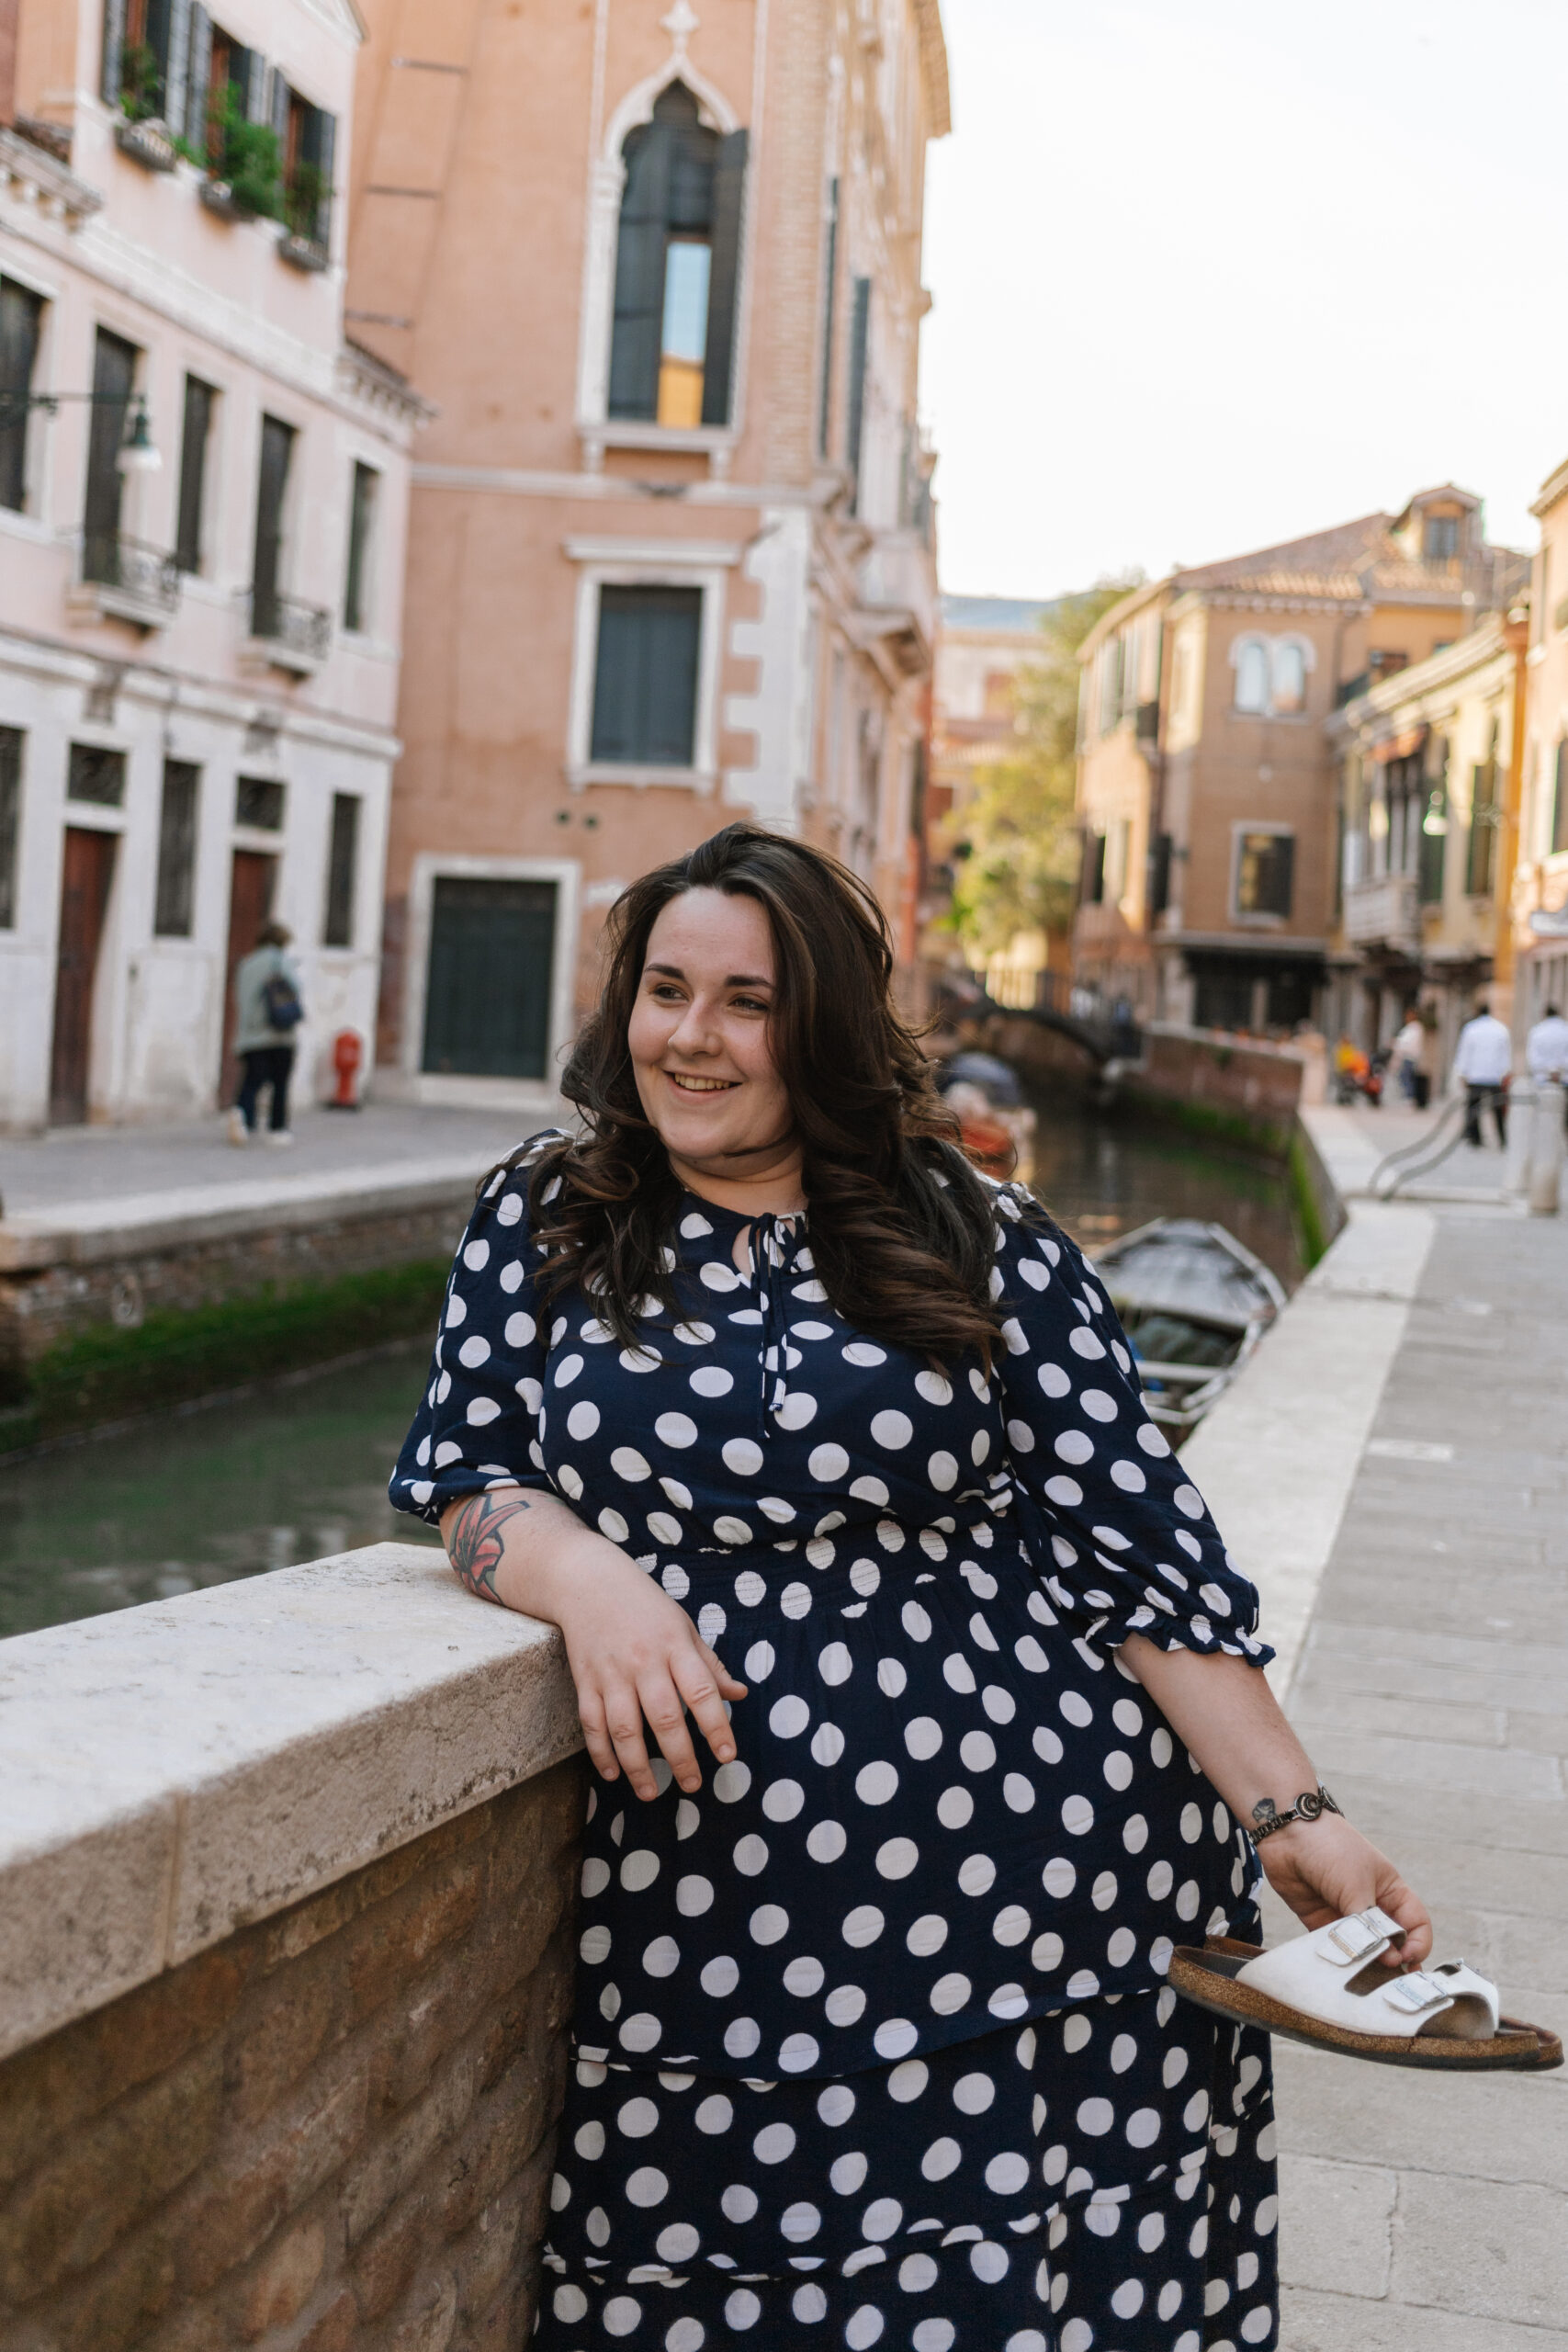 Alex wears a spotty dress and stands barefoot by a Venetian canal, smiling